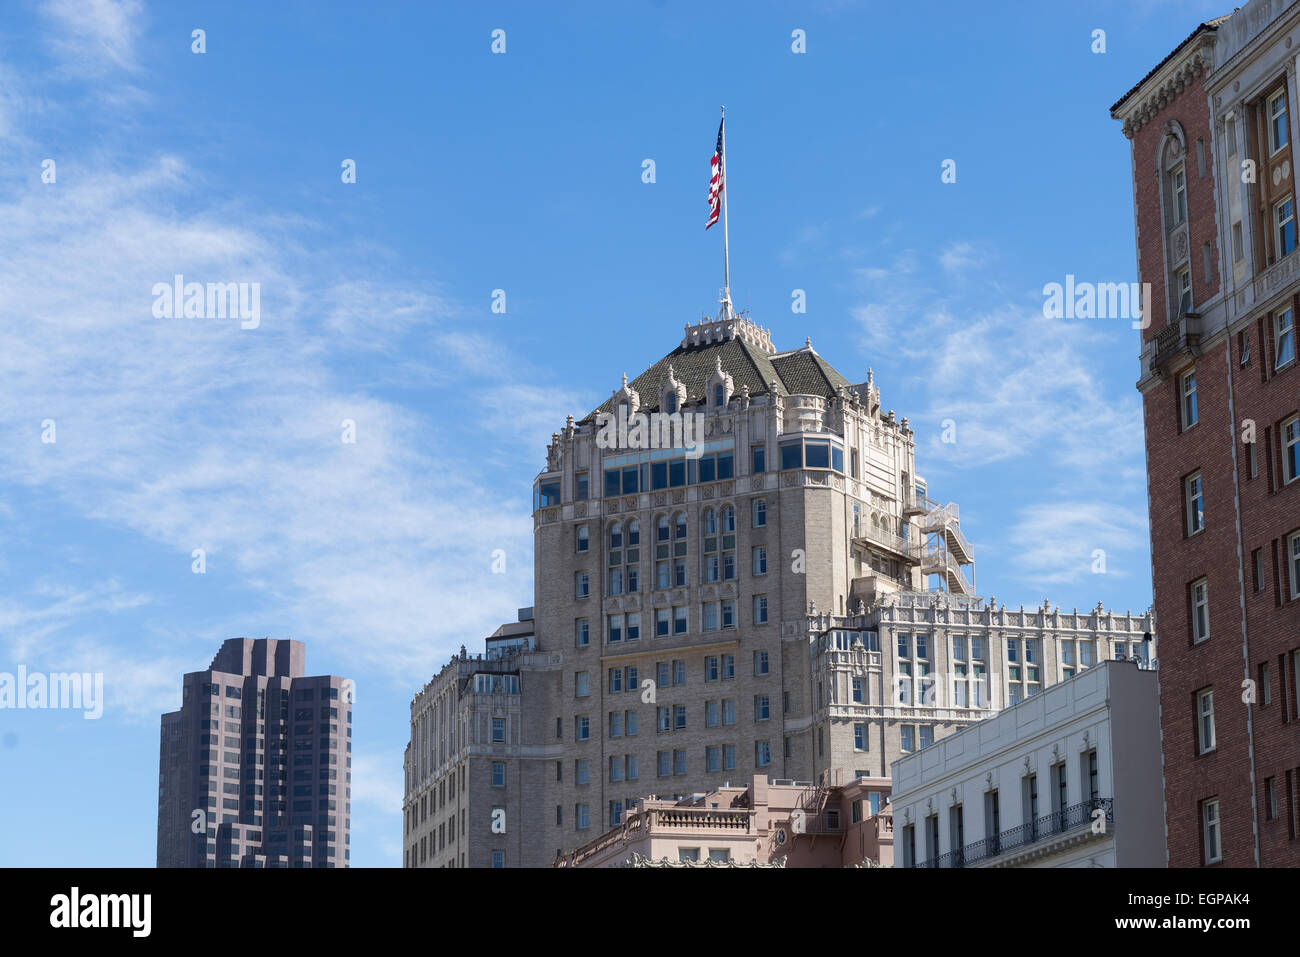 Historic Mark Hopkins Intercontinental Hotel, designed by architects Weeks and Day. Nob Hill, San Francisco. Stock Photo